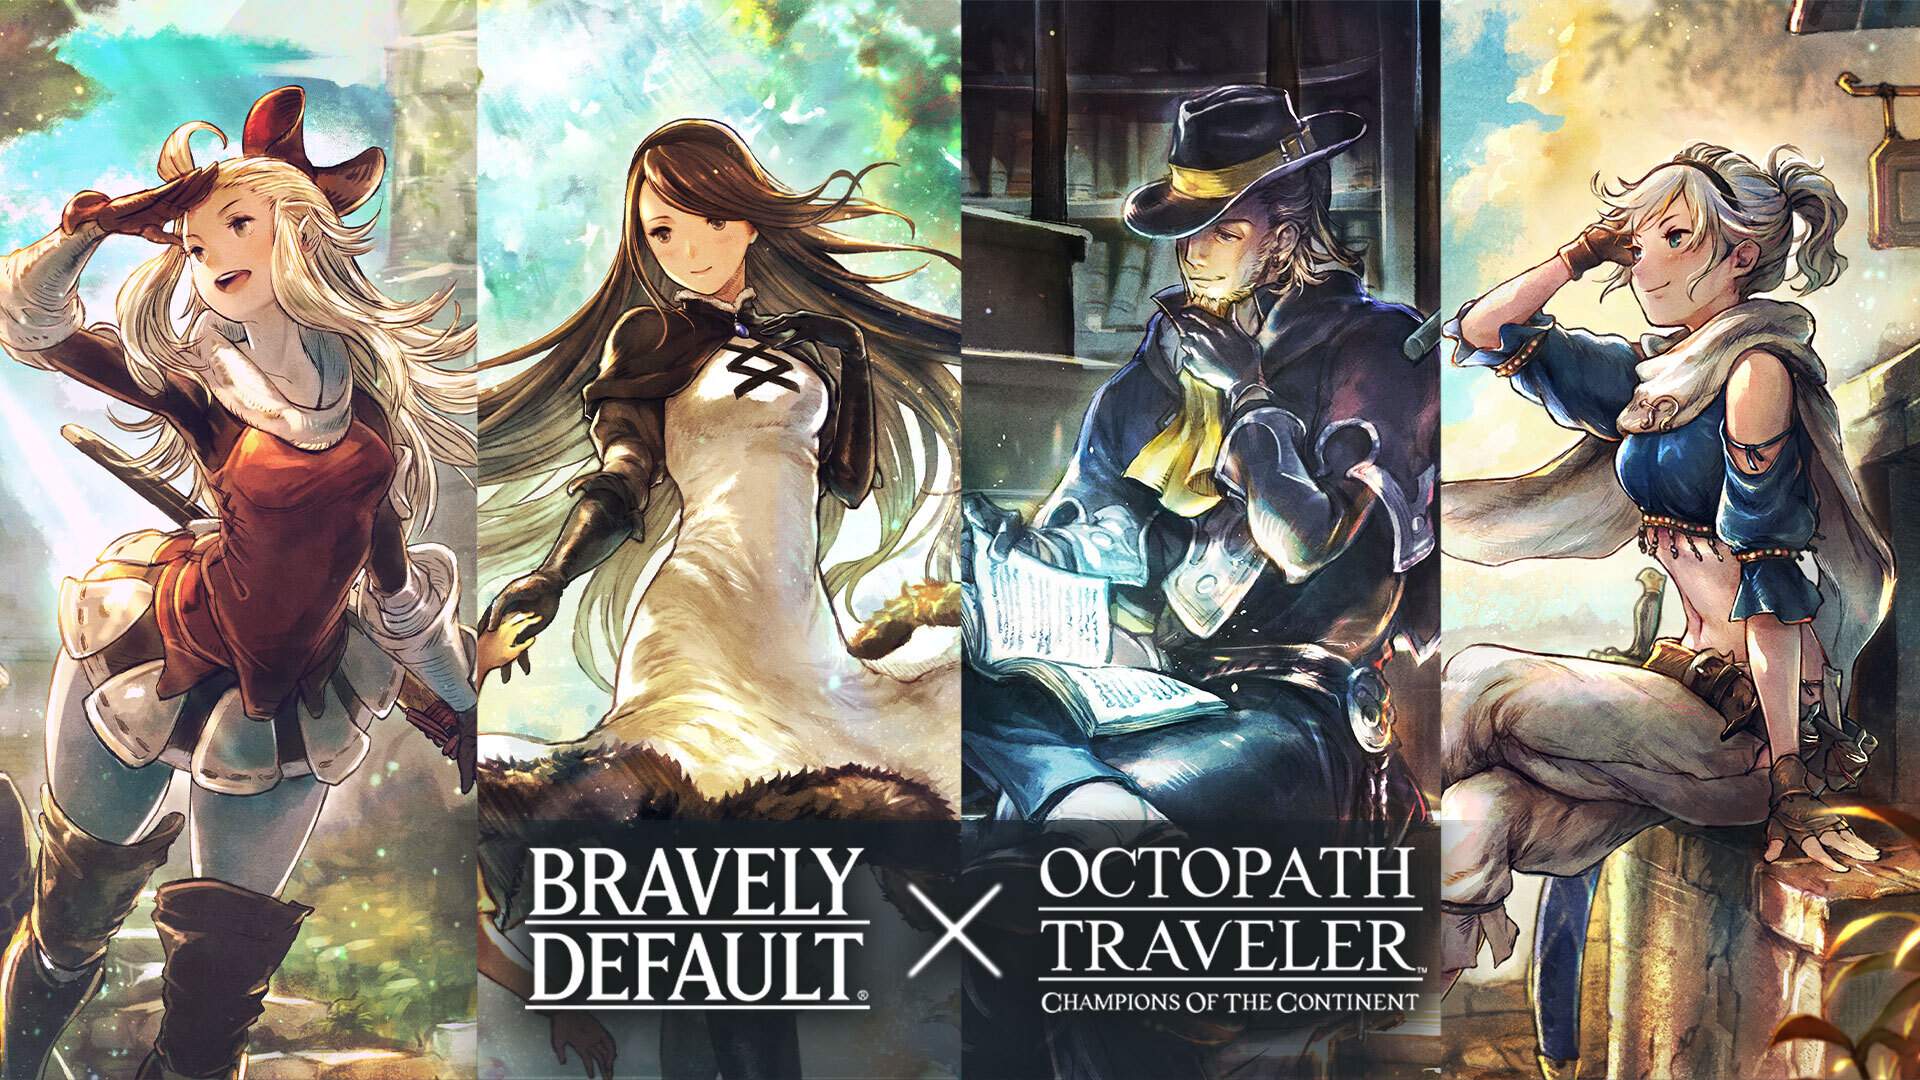 Edea, Agnès, Elvis, and Adelle of the Bravely Default series as they appear in the crossover event